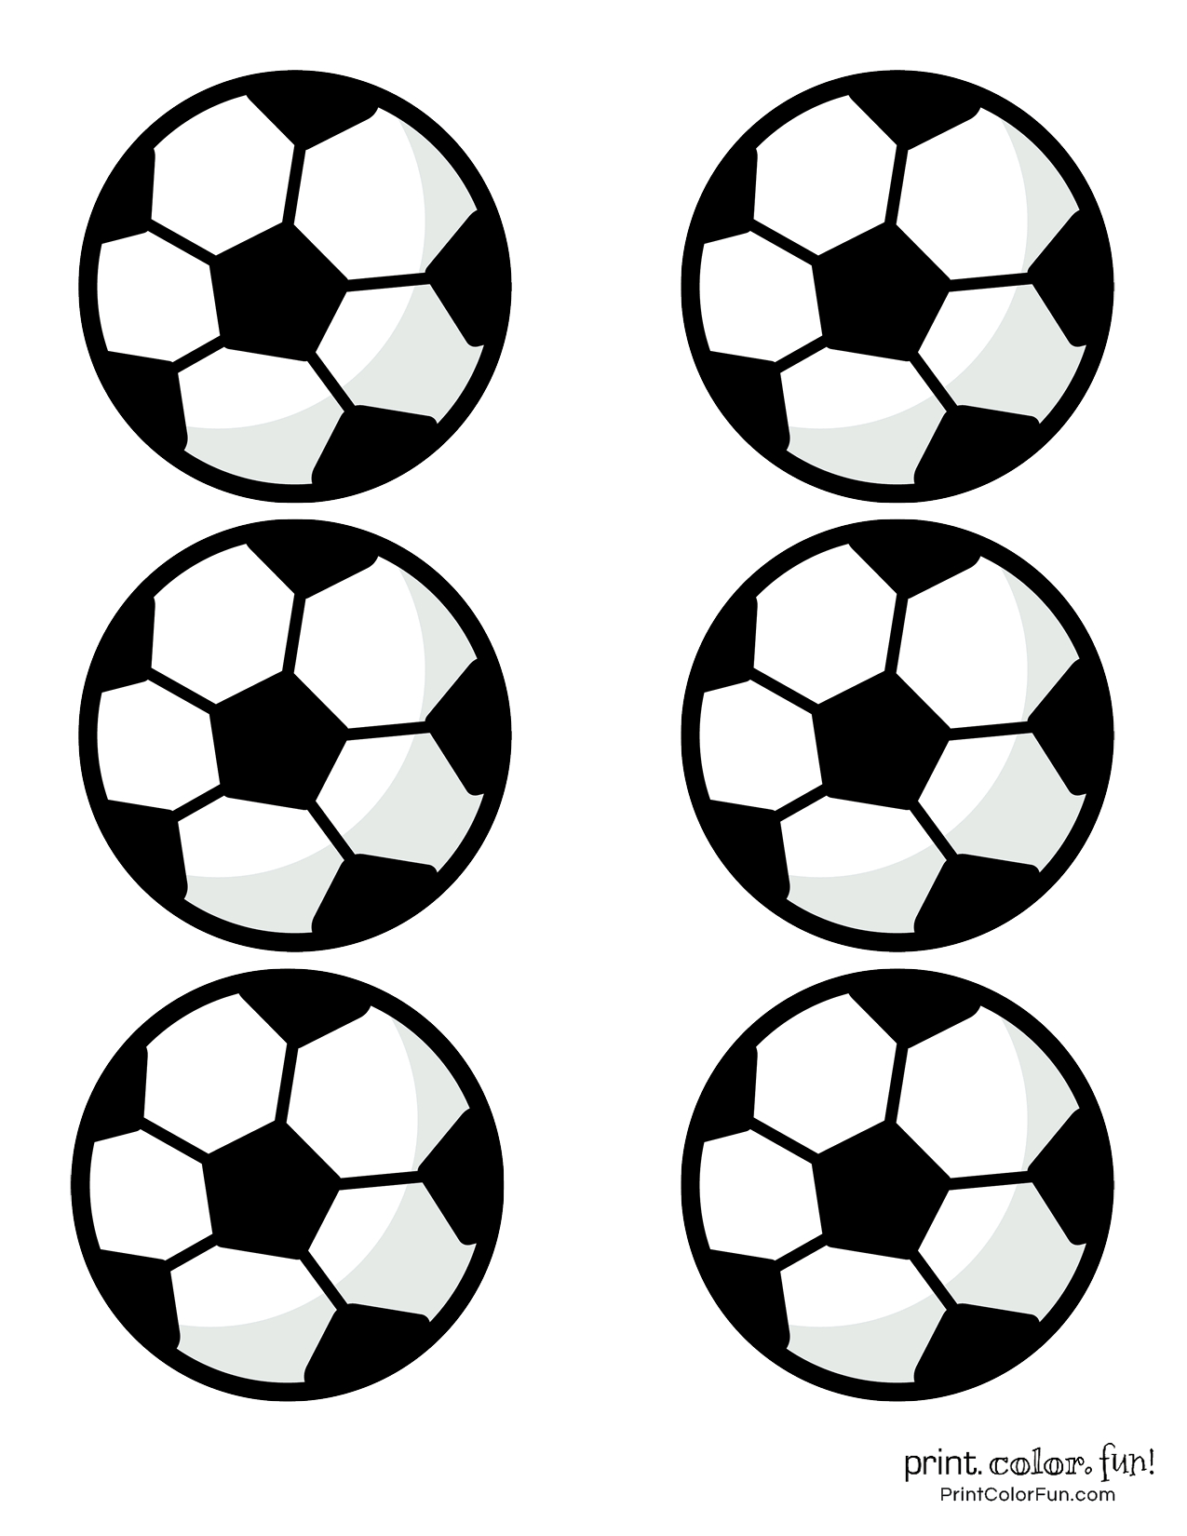 Printable Soccer Ball Template Calep midnightpig co With Regard To